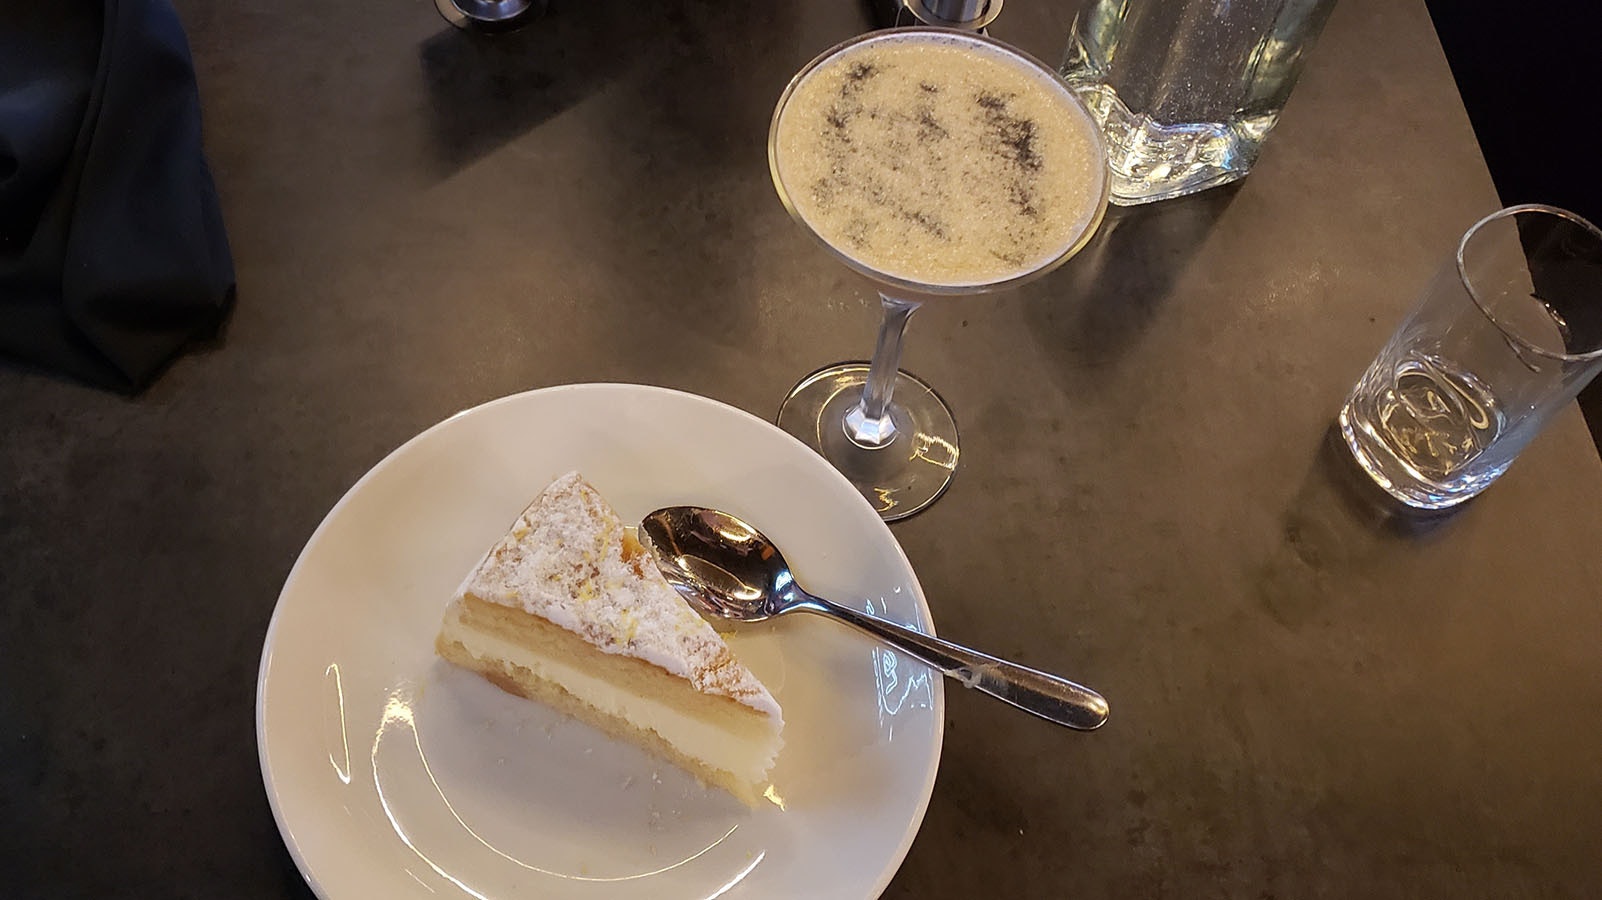 Dessert paired with an espresso martini at the Gastropub Warehouse in Sheridan.